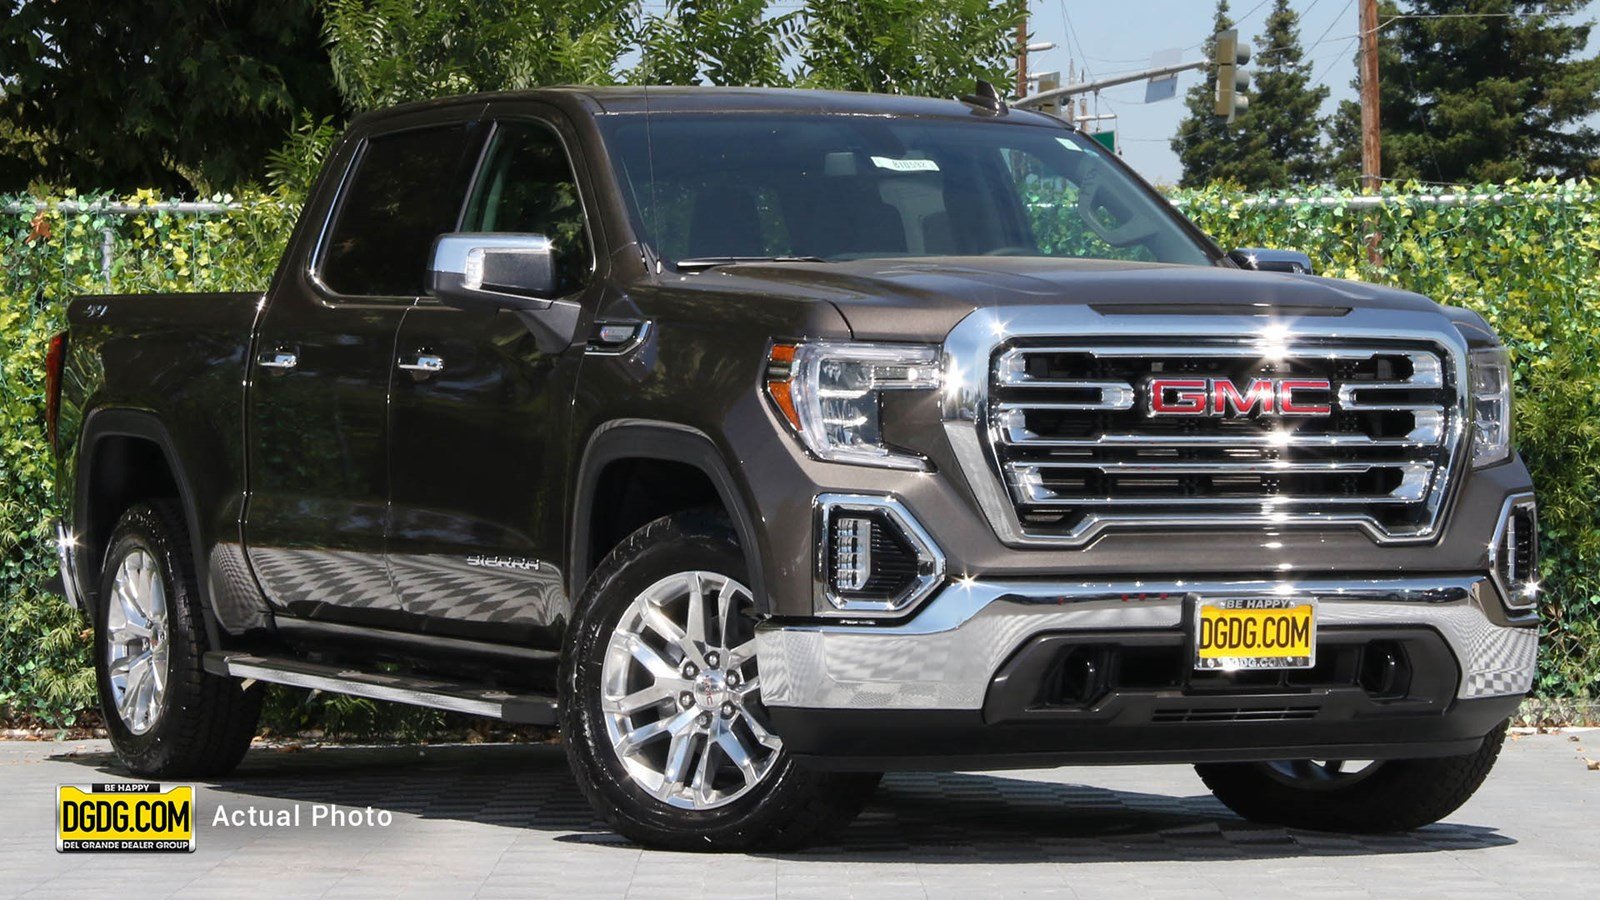 2019 GMC Sierra First Drive Review: GM's New Truck in ...